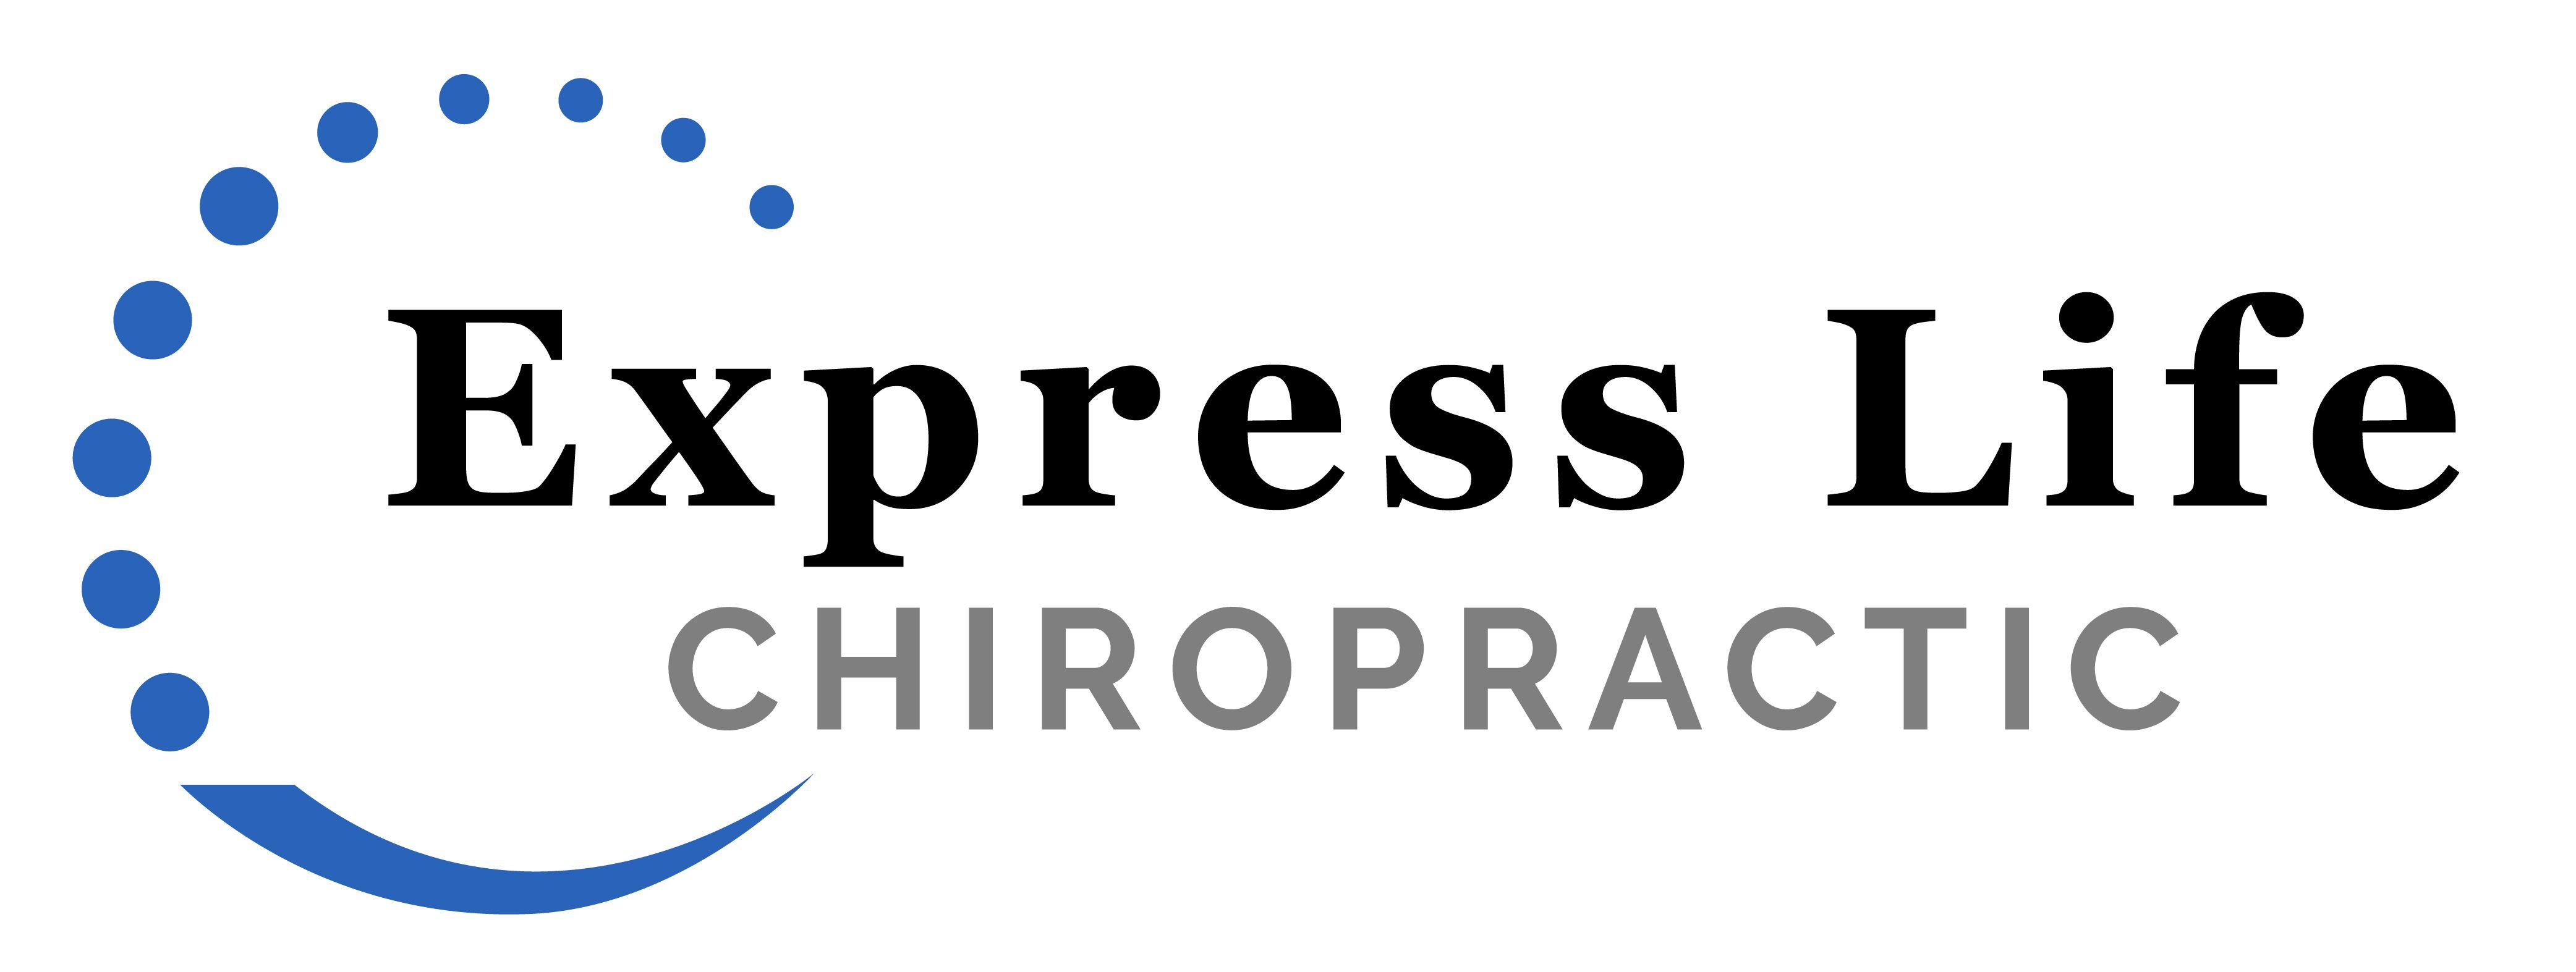 Express Life Chiropractic